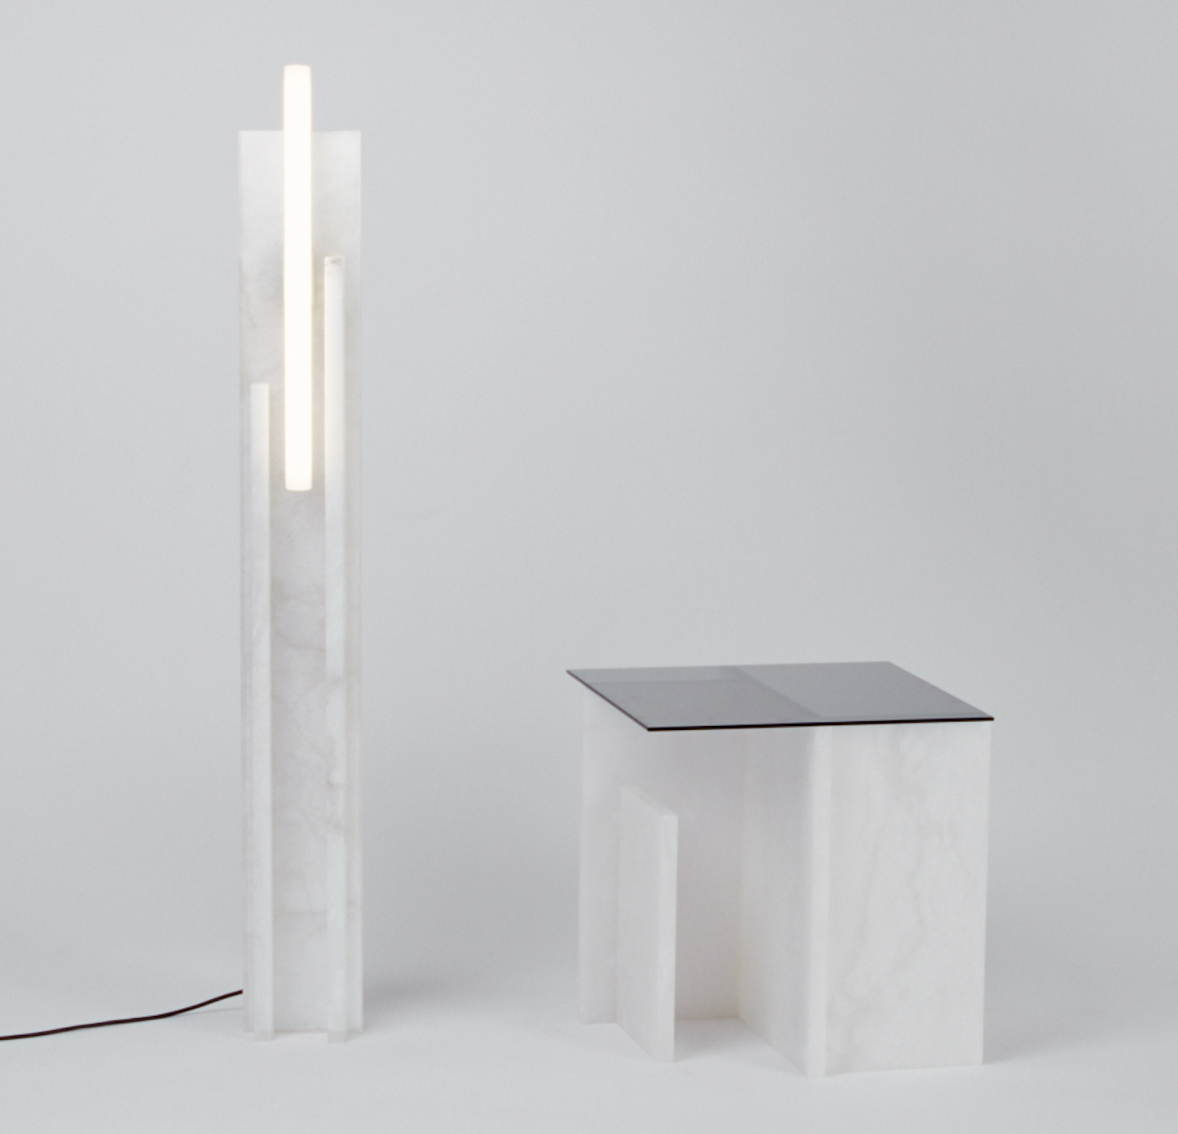 ggallery image - alabaster M lamp and side table